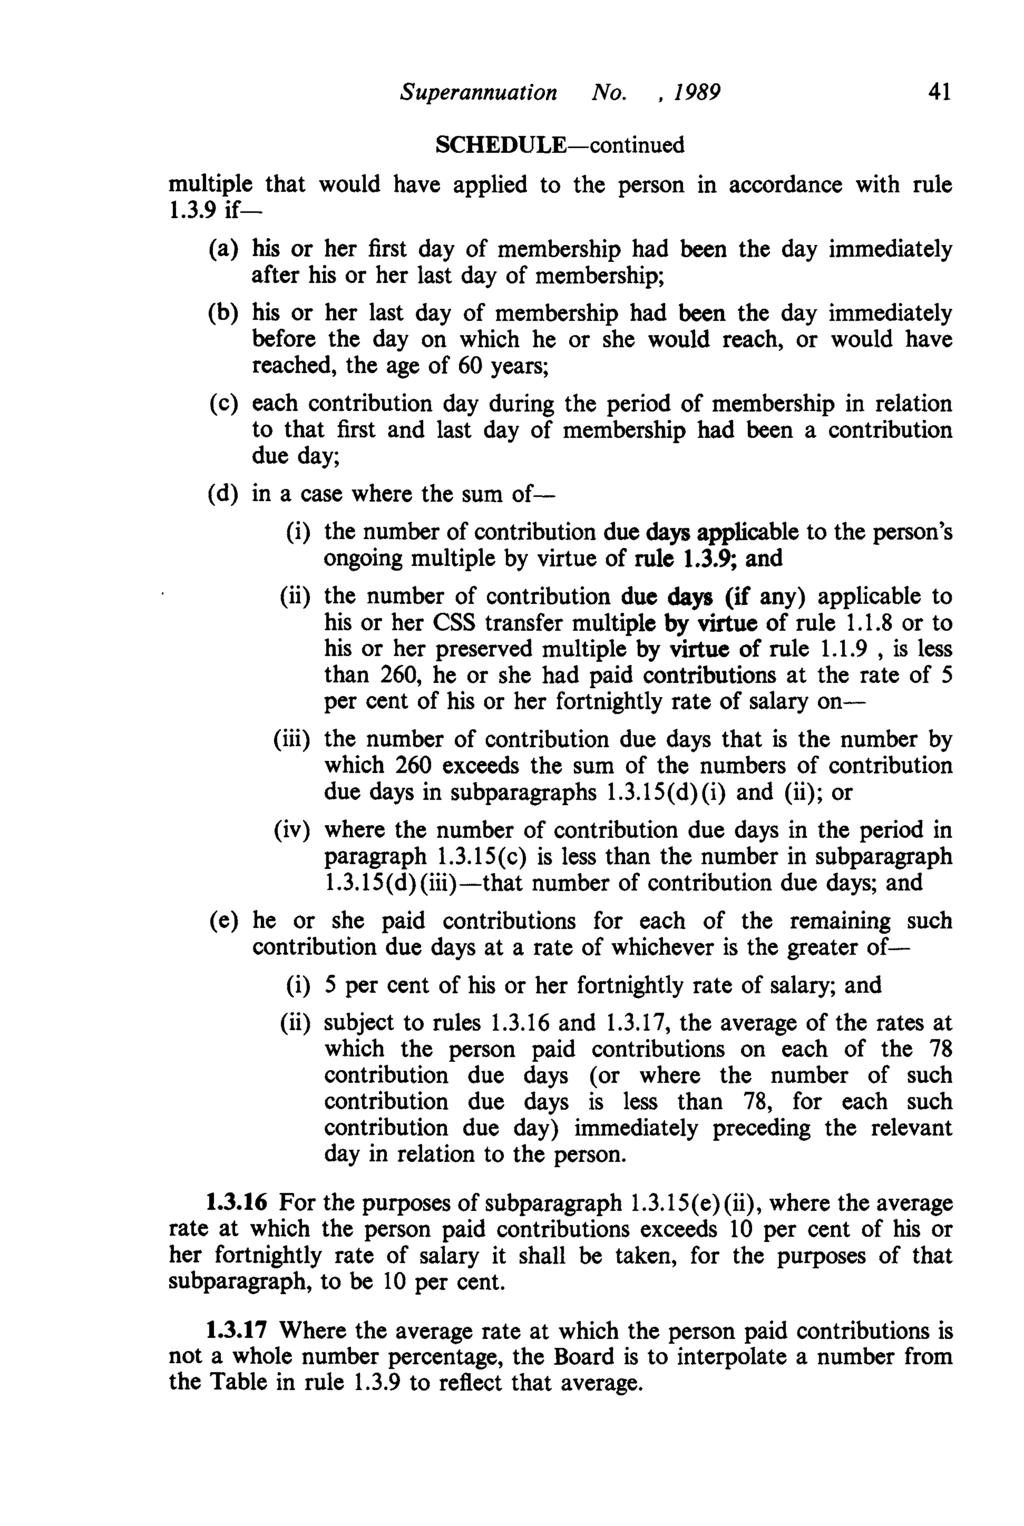 Superannuation No.,1989 41 multiple that would have applied to the person in accordance with rule 1.3.